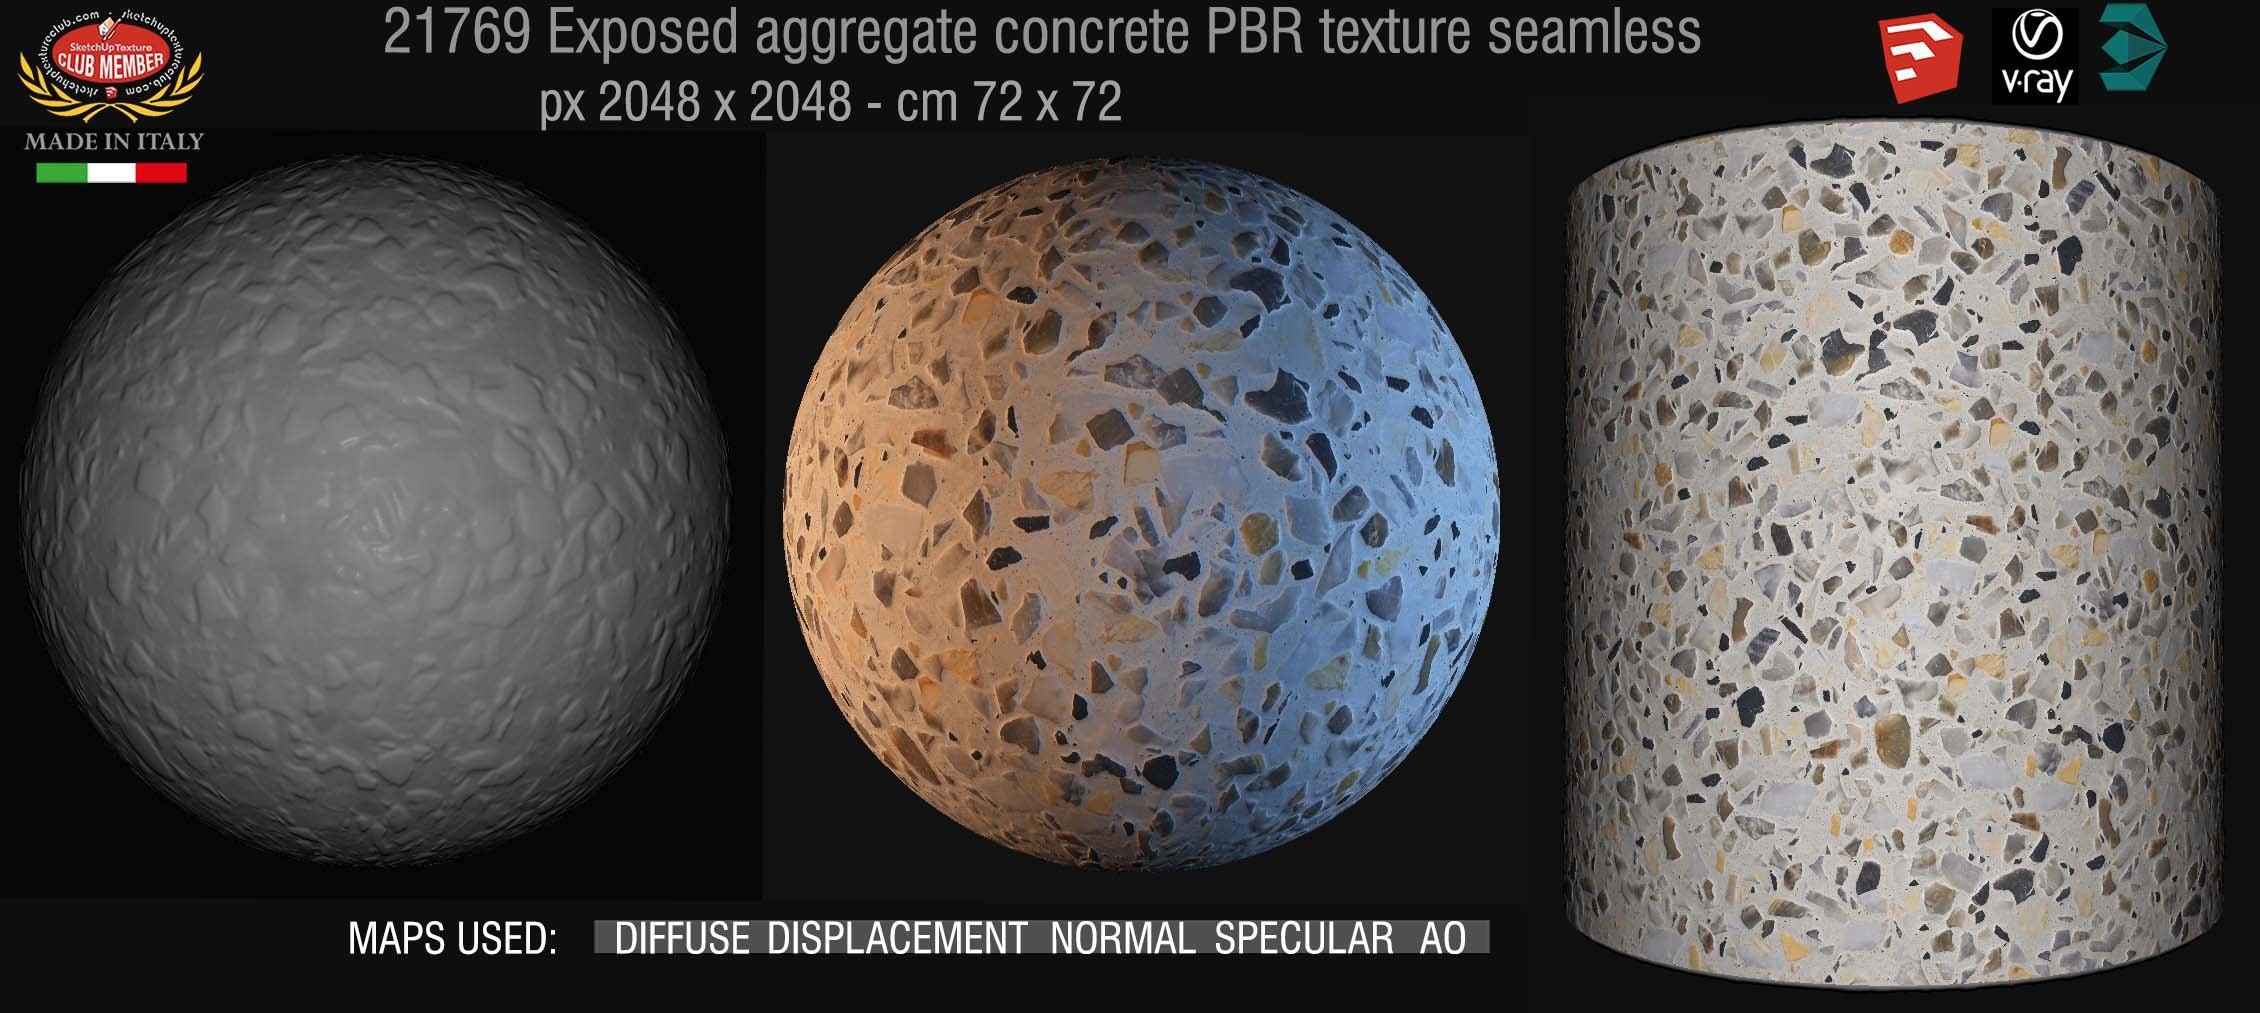 21769 Exposed aggregate concrete PBR textures seamless DEMO